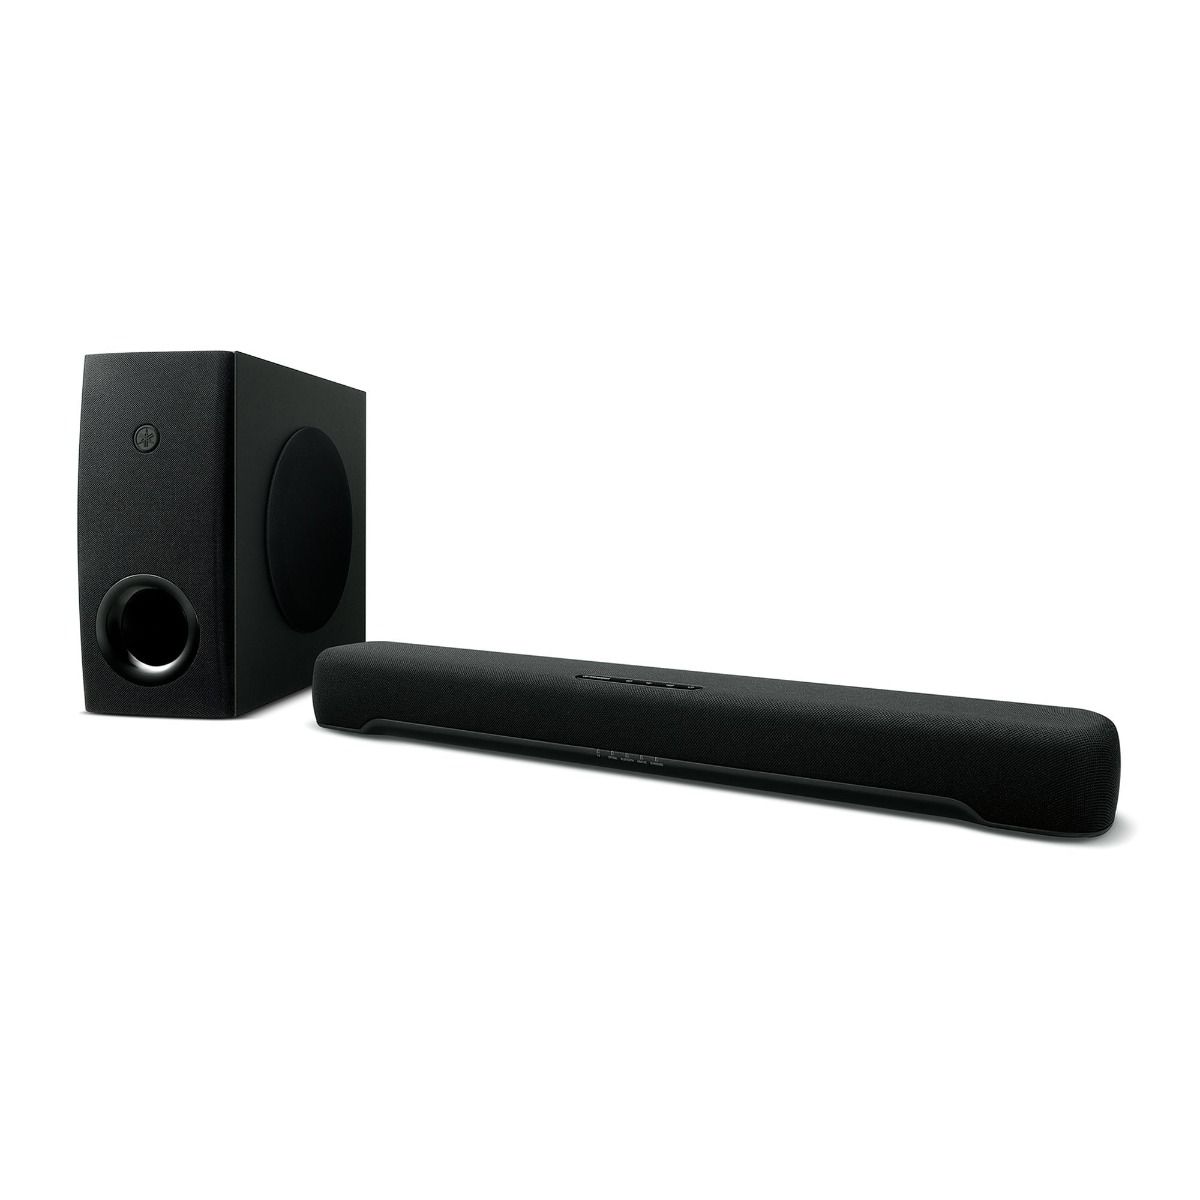 Yamaha SR-C30A Compact Sound Bar with Wireless Subwoofer